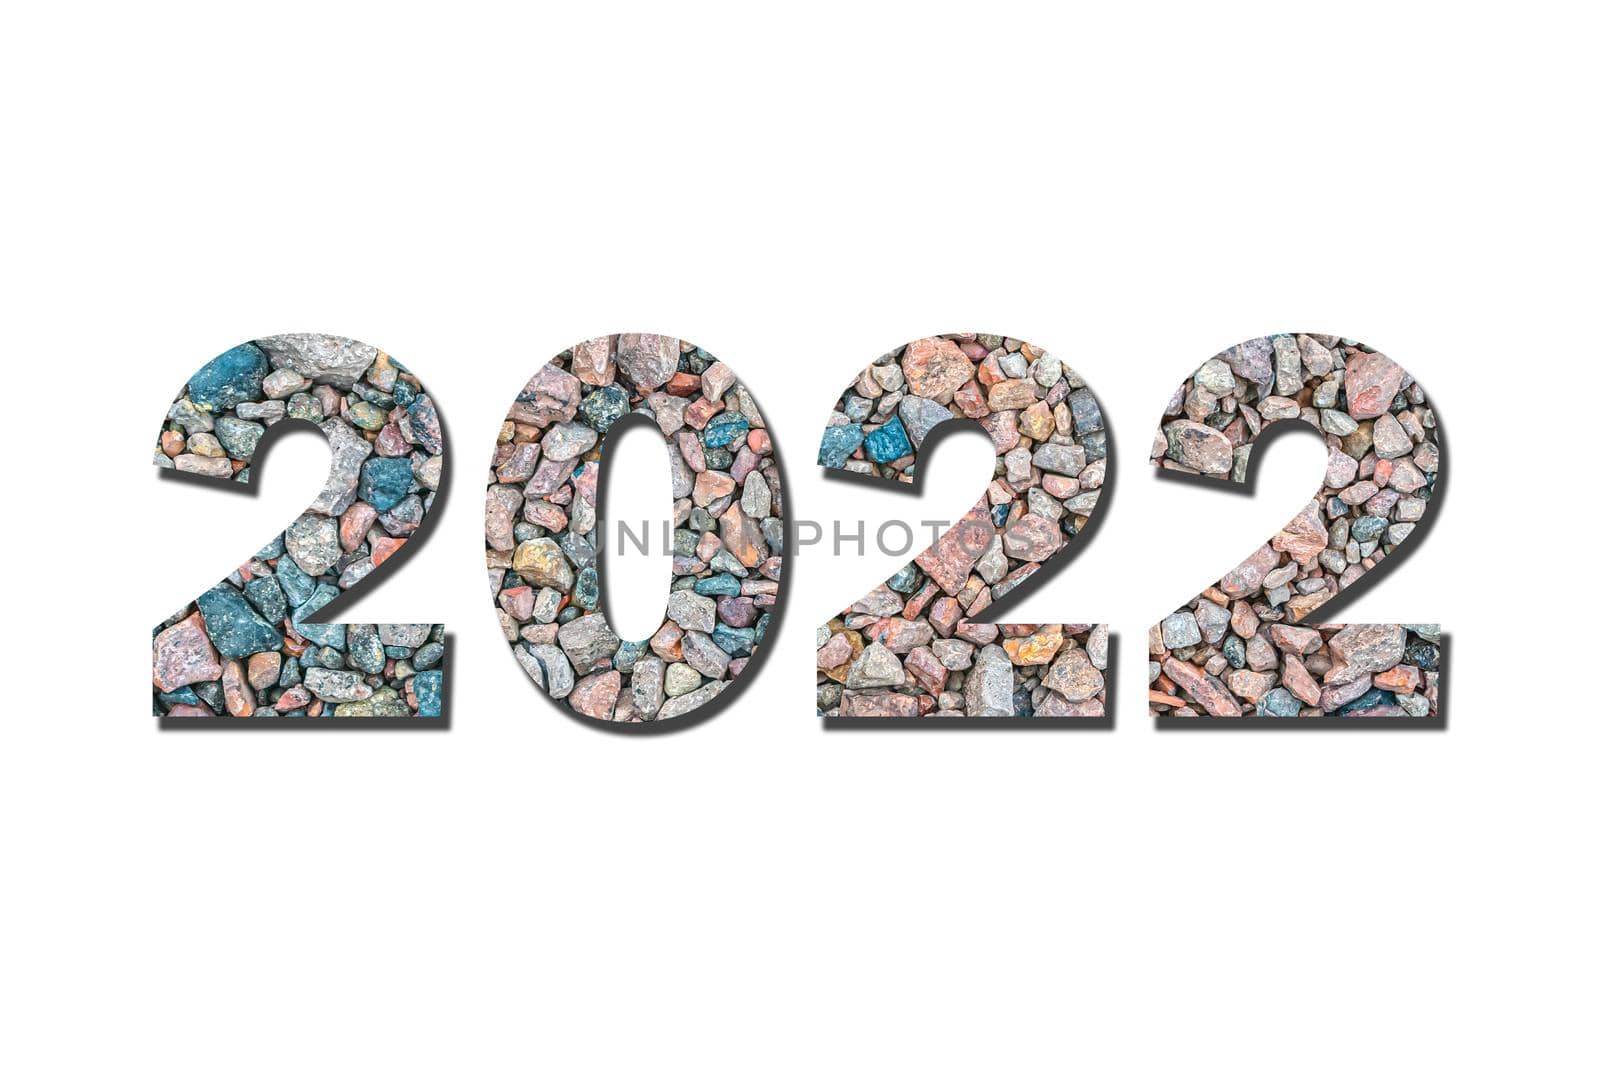 The number 2022 symbolizing the year, textured from small stones of different colors on a white background